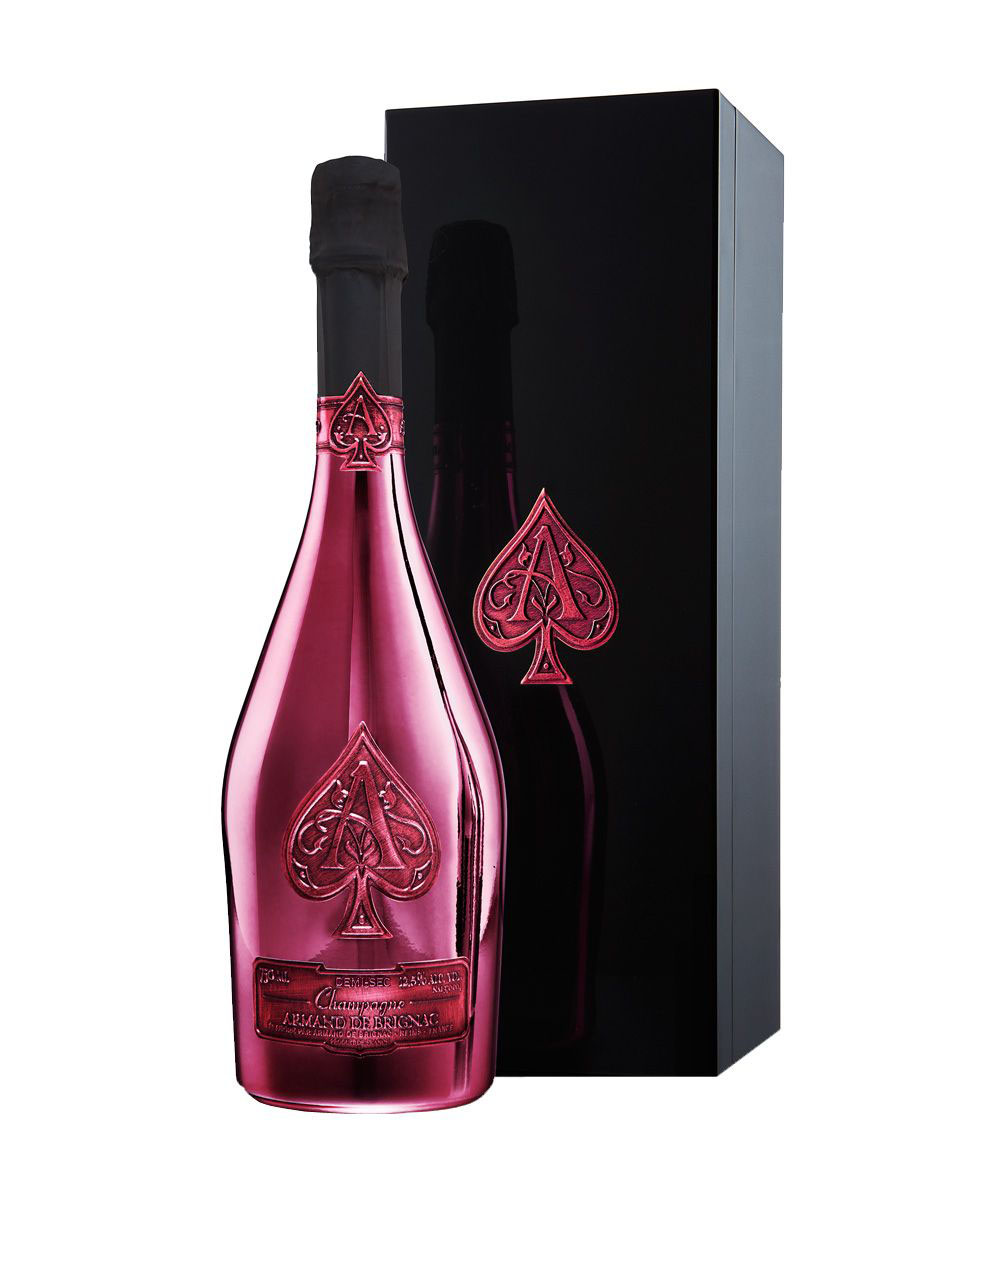 Perrier Jouet Belle Epoque Brut 2007 Limited Edition small Discoveries By Mischer Traxler